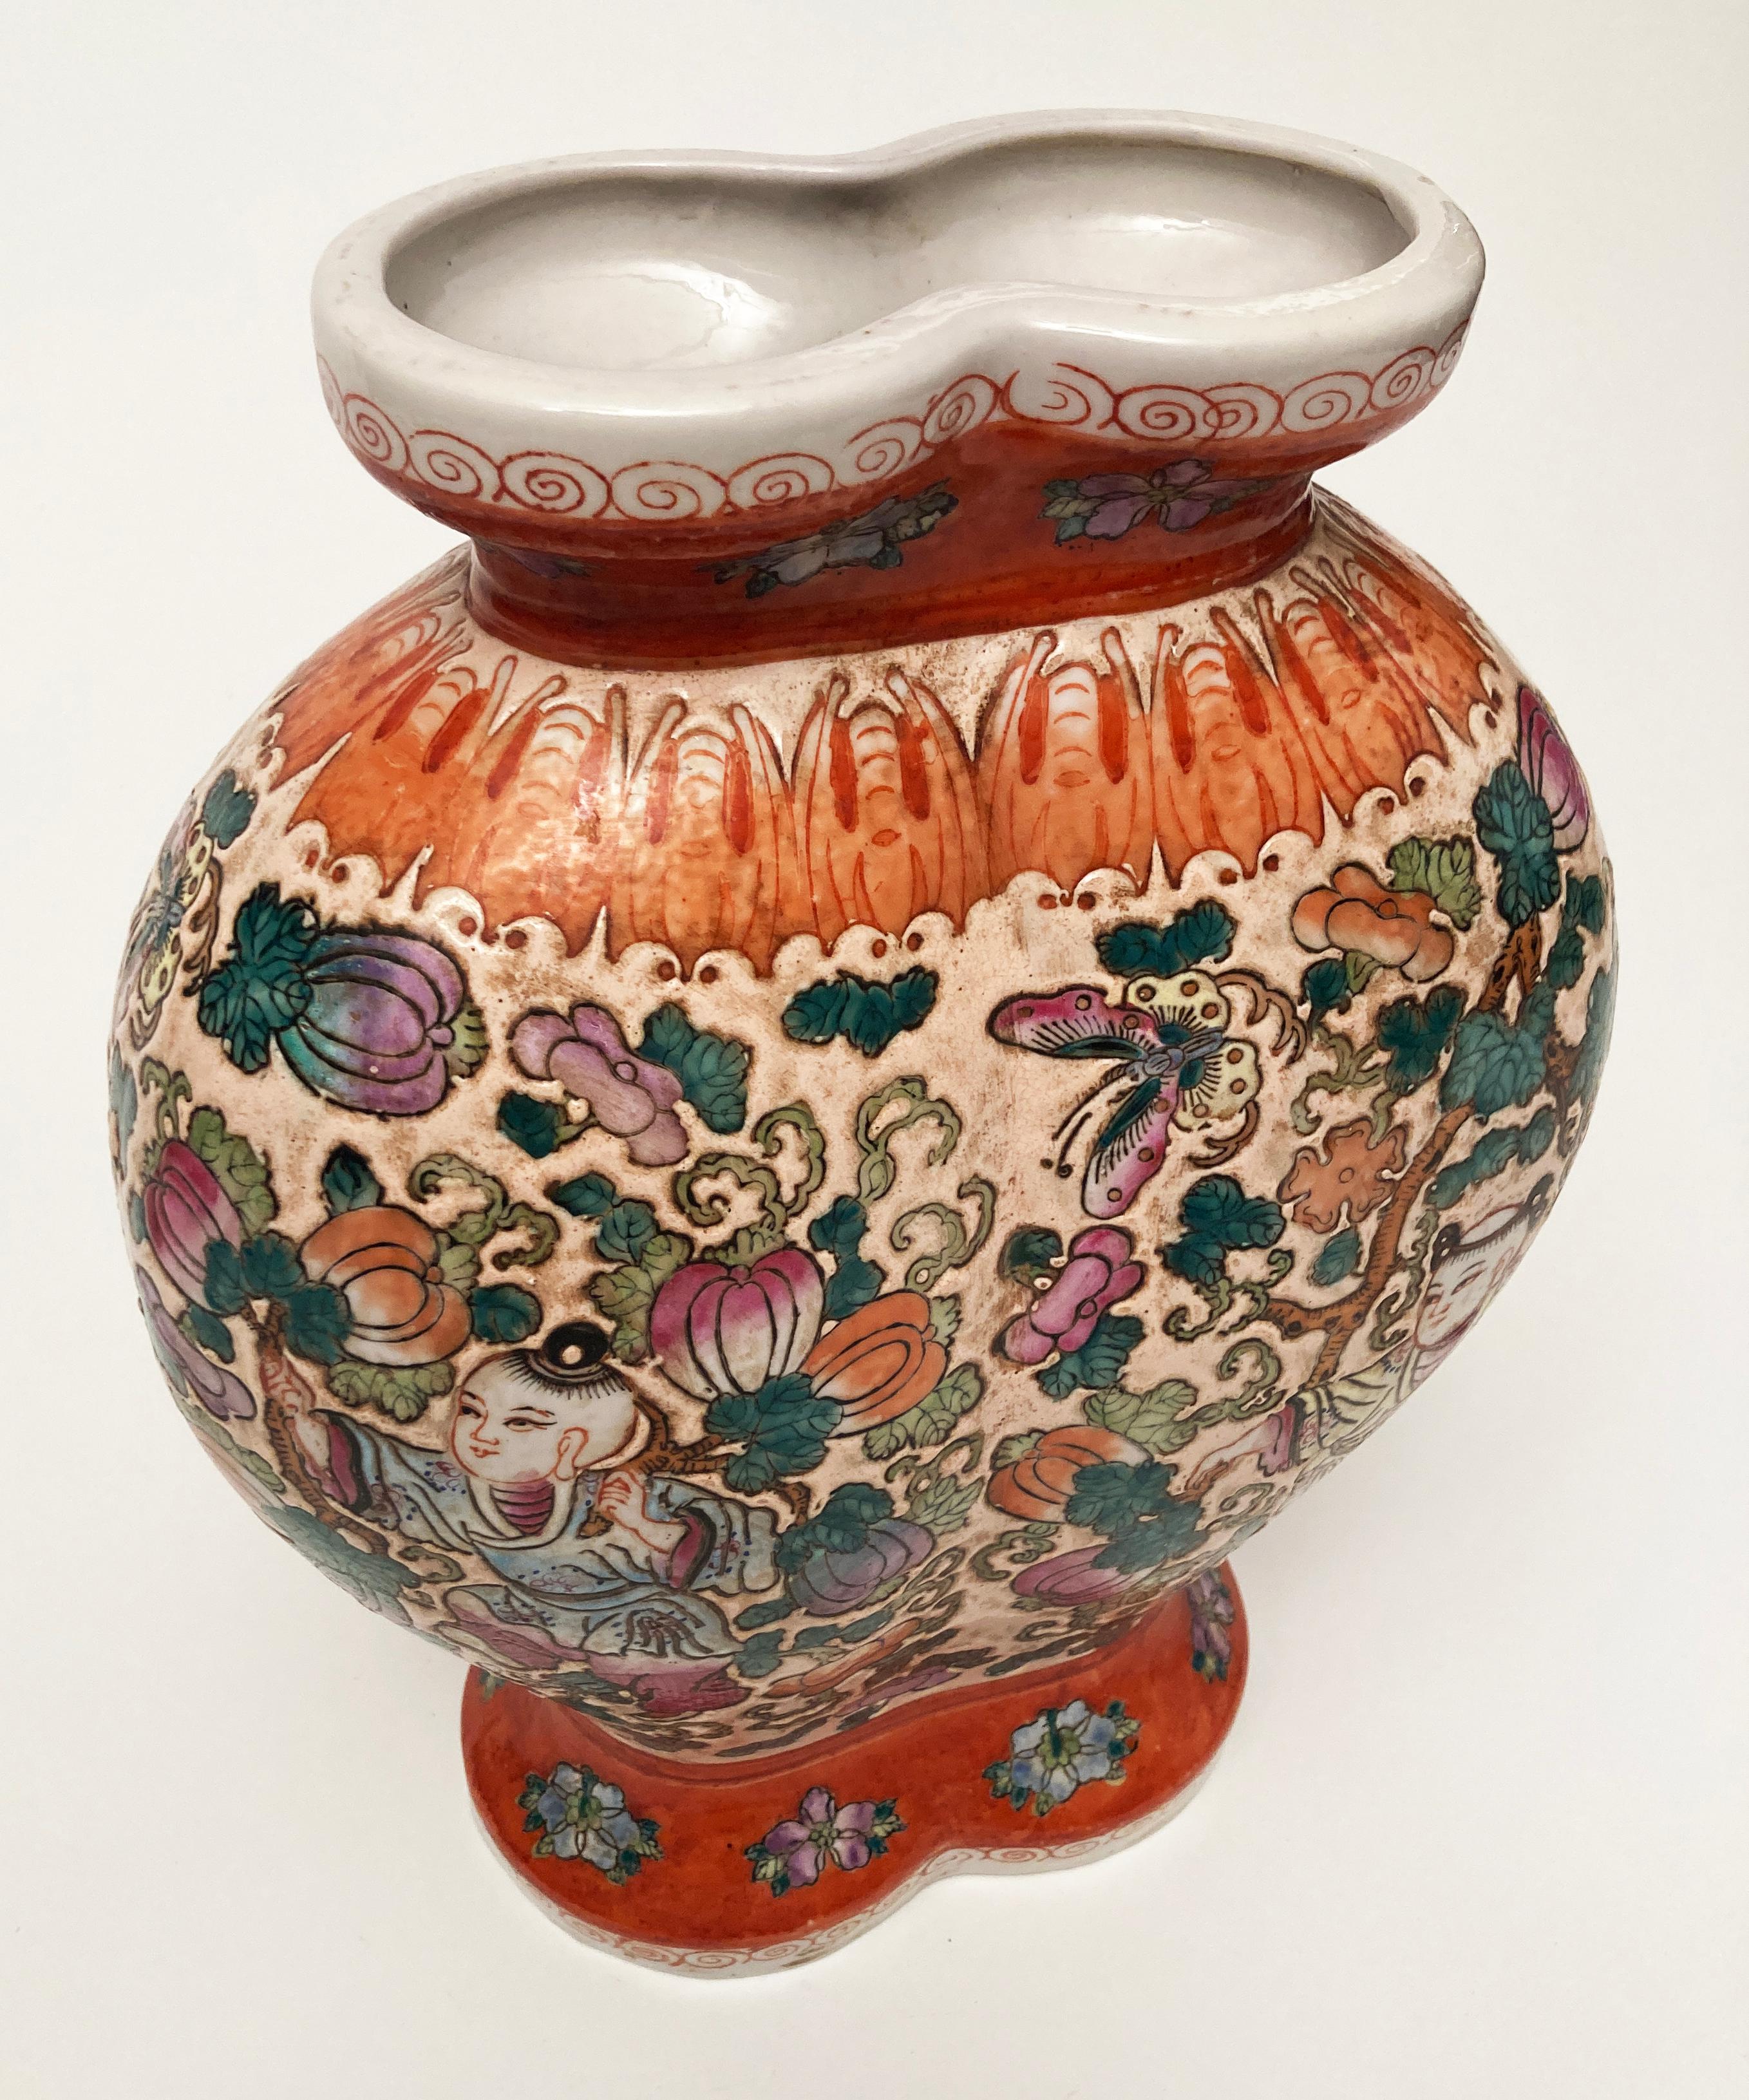 19th Century Qing Ching Dynasty 1821-1850 Porcelain Enamel Double Mouth Chinese Vase For Sale